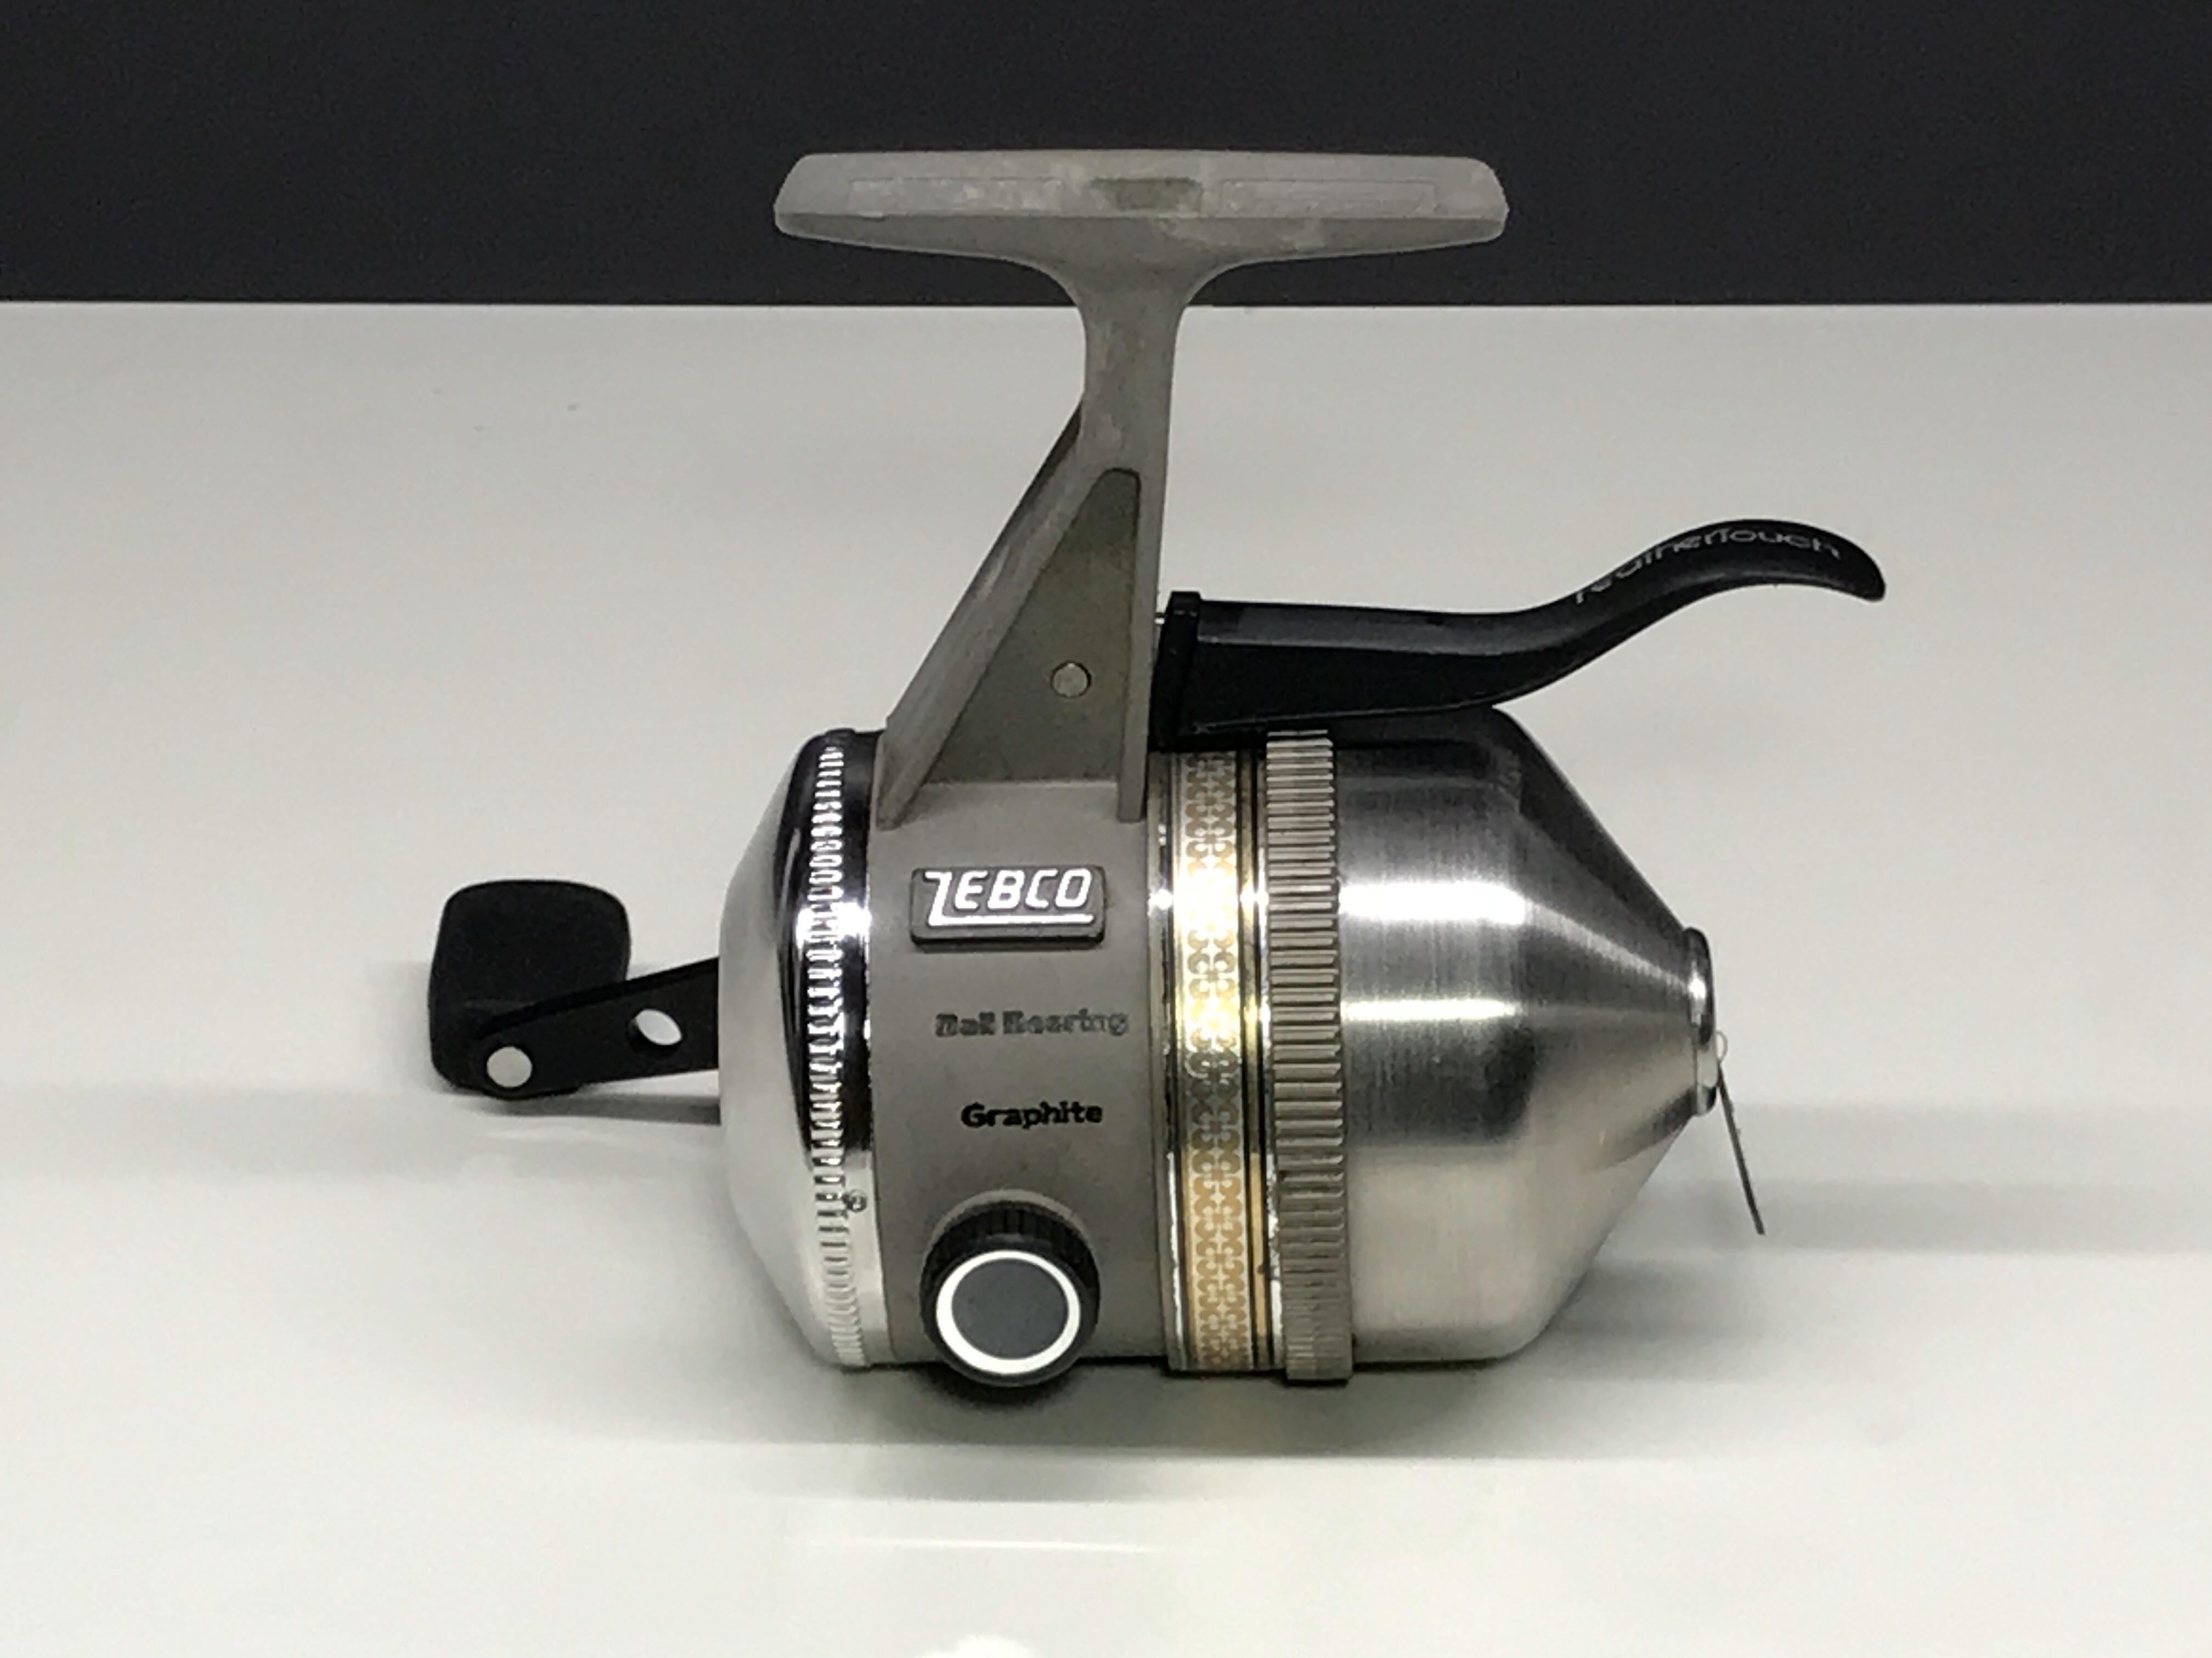 Vintage Zebco One Classic Feathertouch Spincasting Reel With Dual Drag,  Works Well, Very Good Used Condition, Mild Wear & Grunge, Zebco USA 